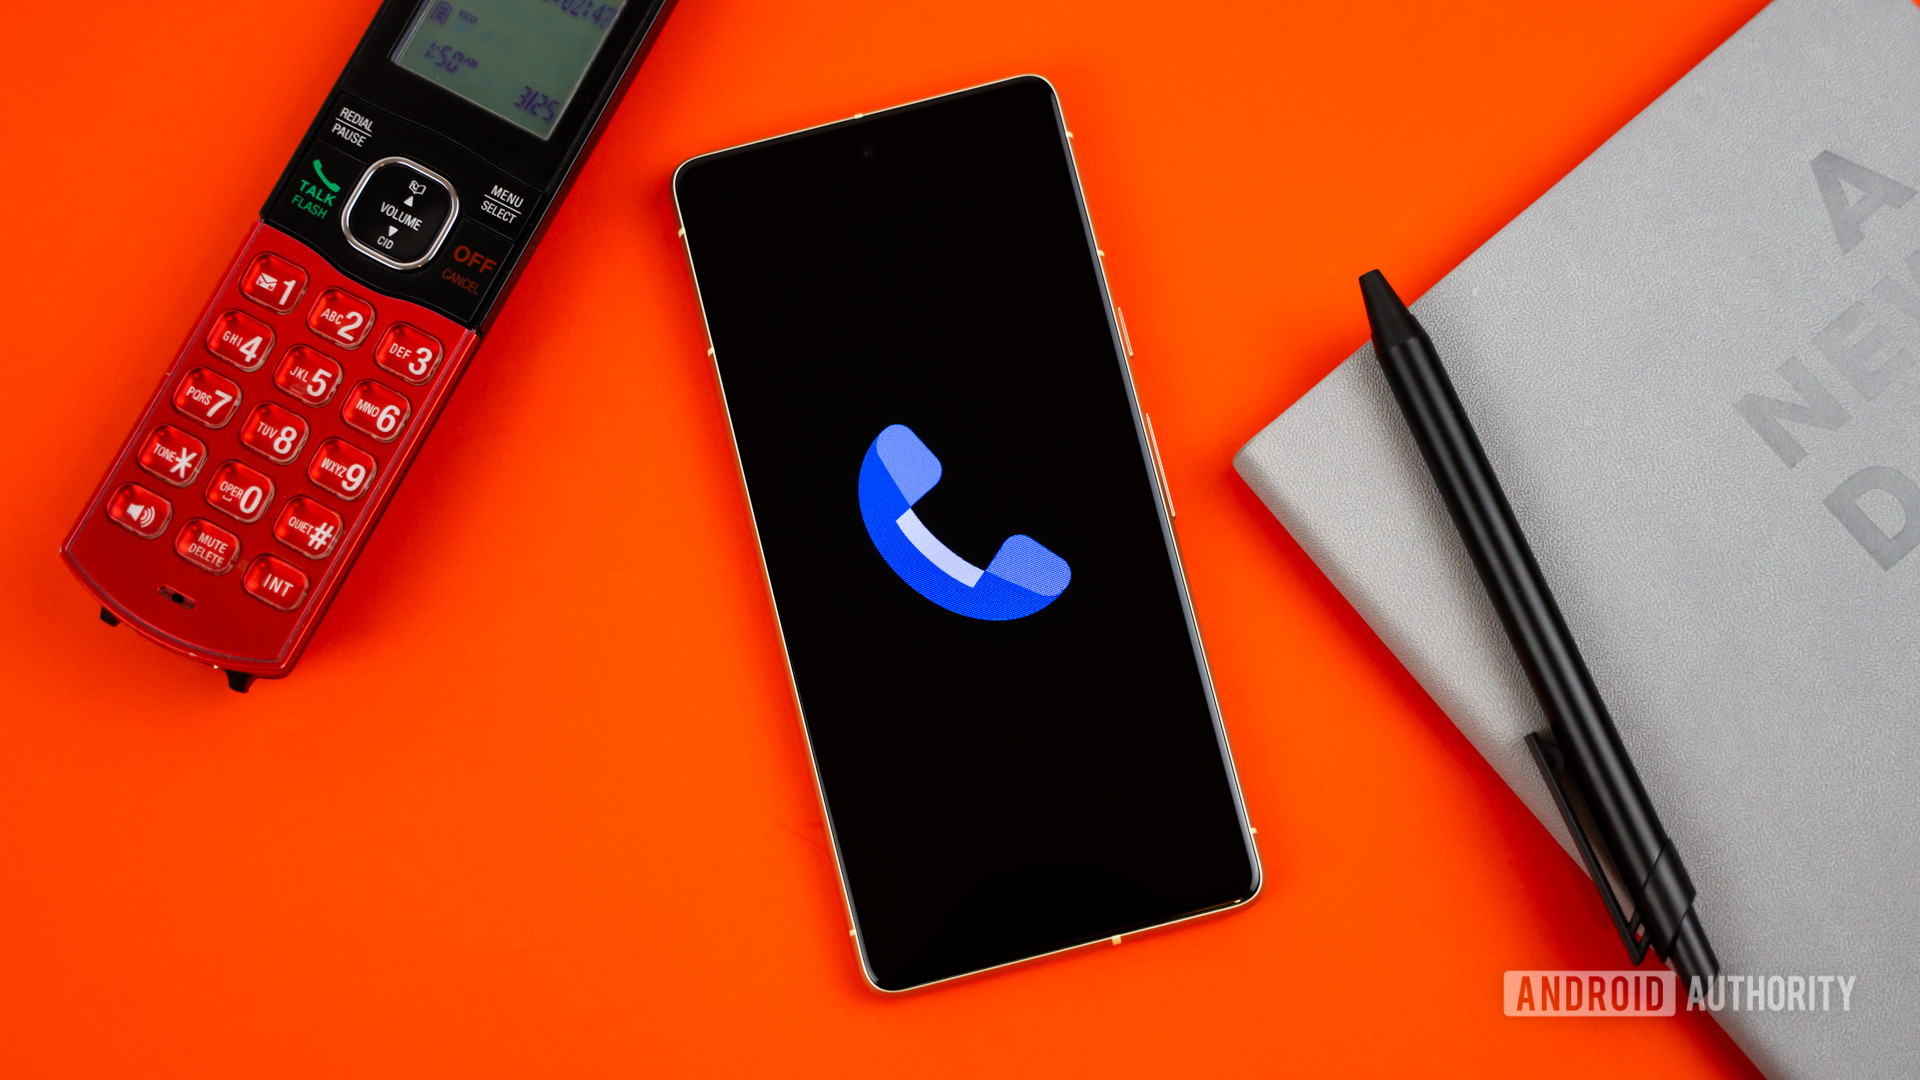 Stock photo of Phone by Google app on phone next to home phone agenda and pen 1